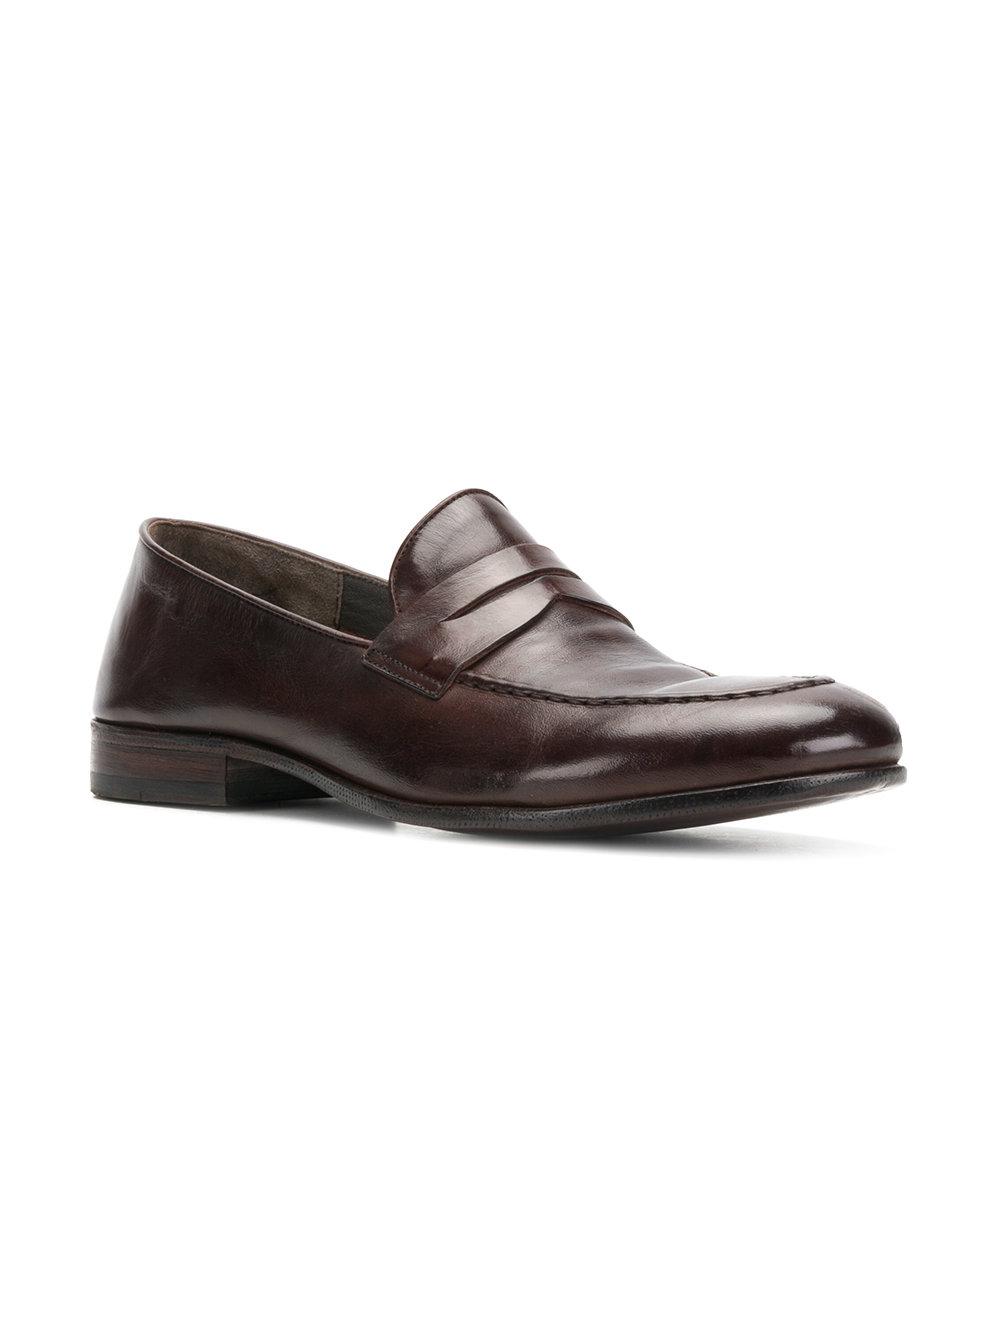 Alberto Fasciani Leather Classic Slip-on Loafers in Brown for Men - Lyst